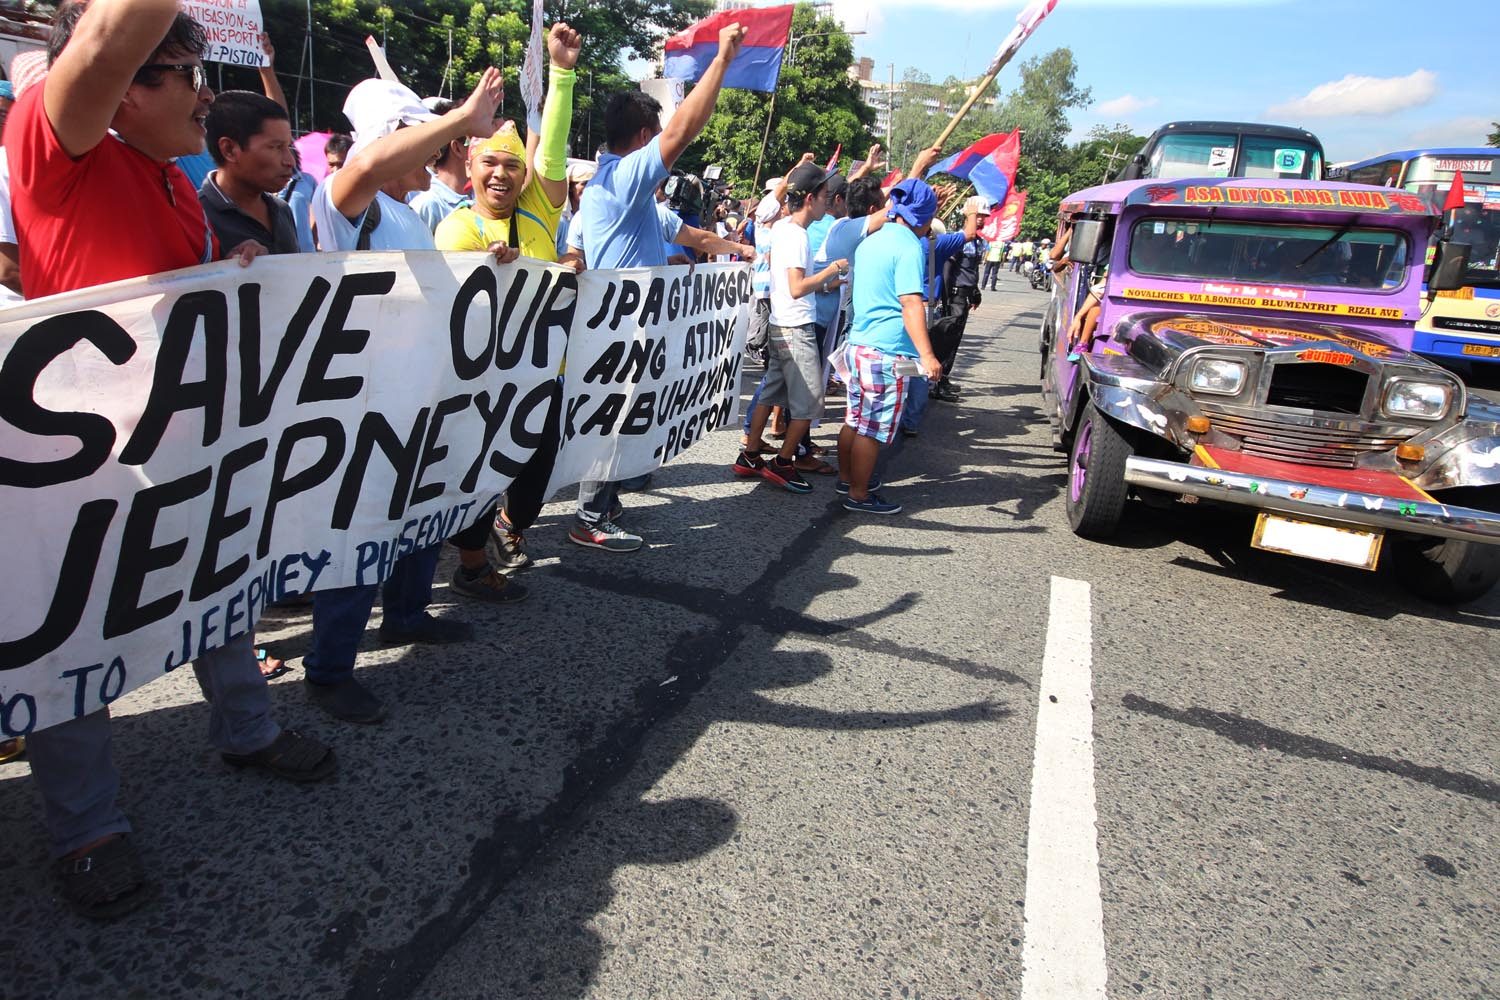 Piston, other groups to hold transport strike on June 25